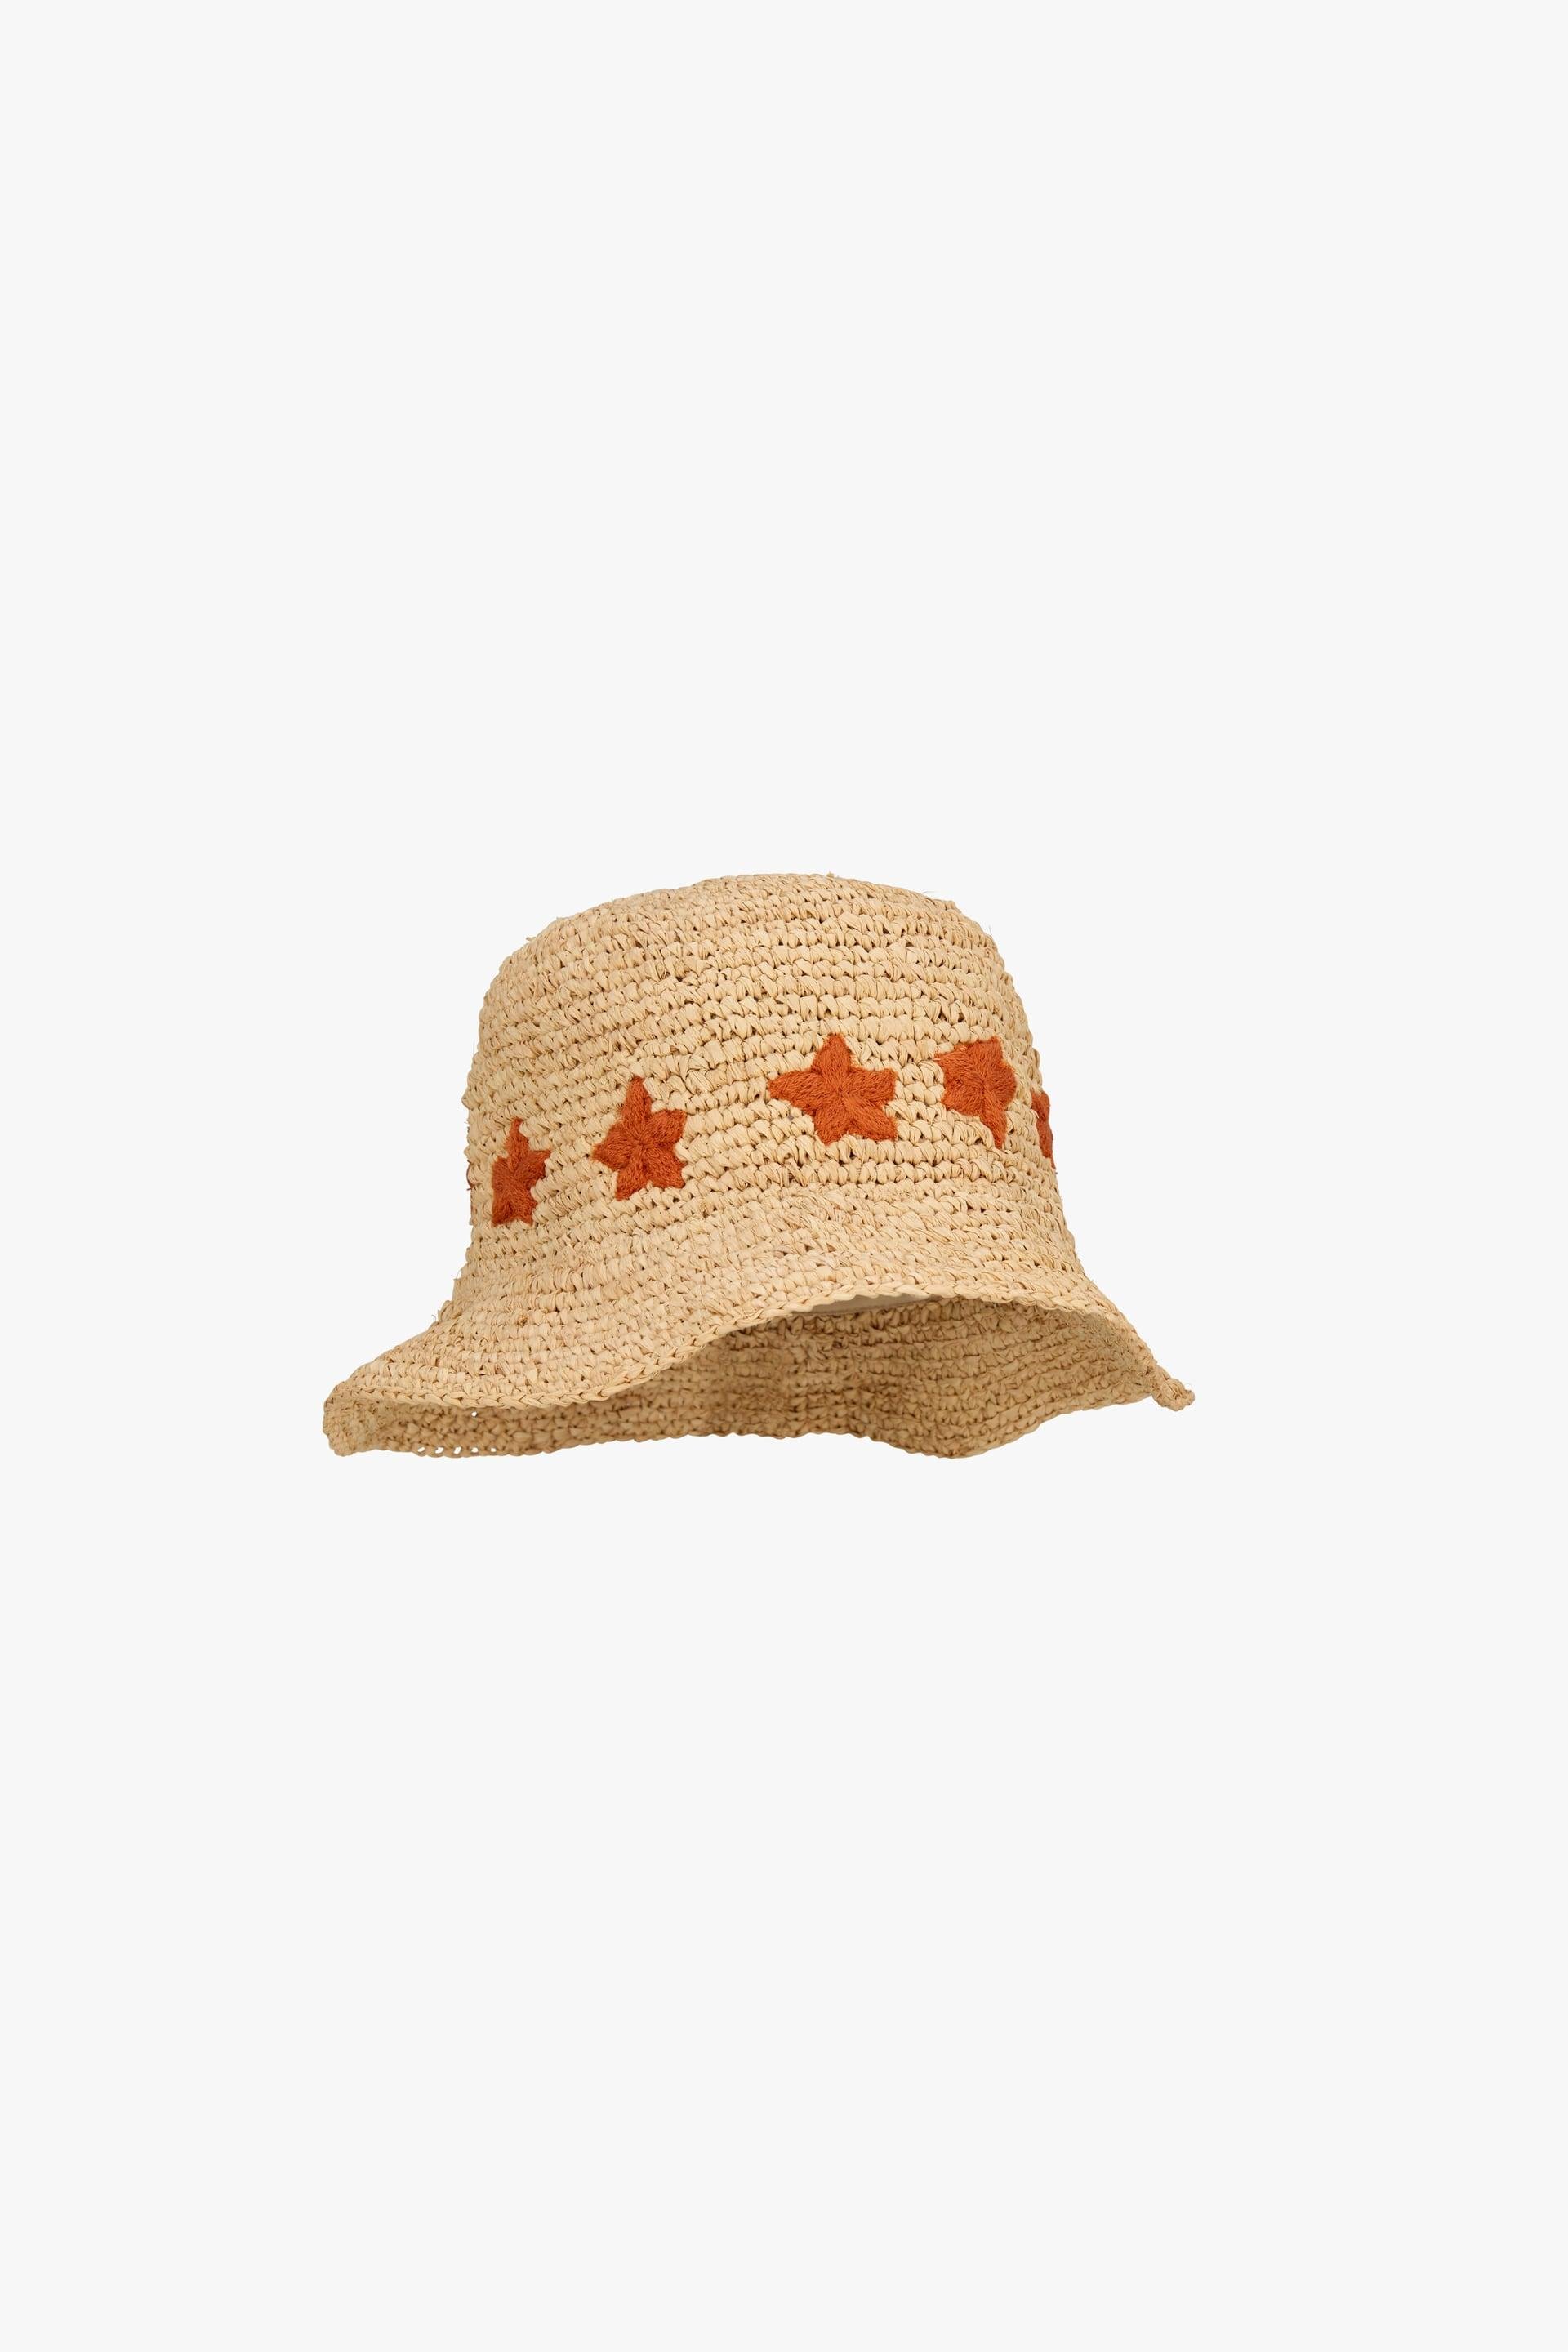 EMBROIDERED STARS RAFFIA HAT LIMITED EDITION by ZARA